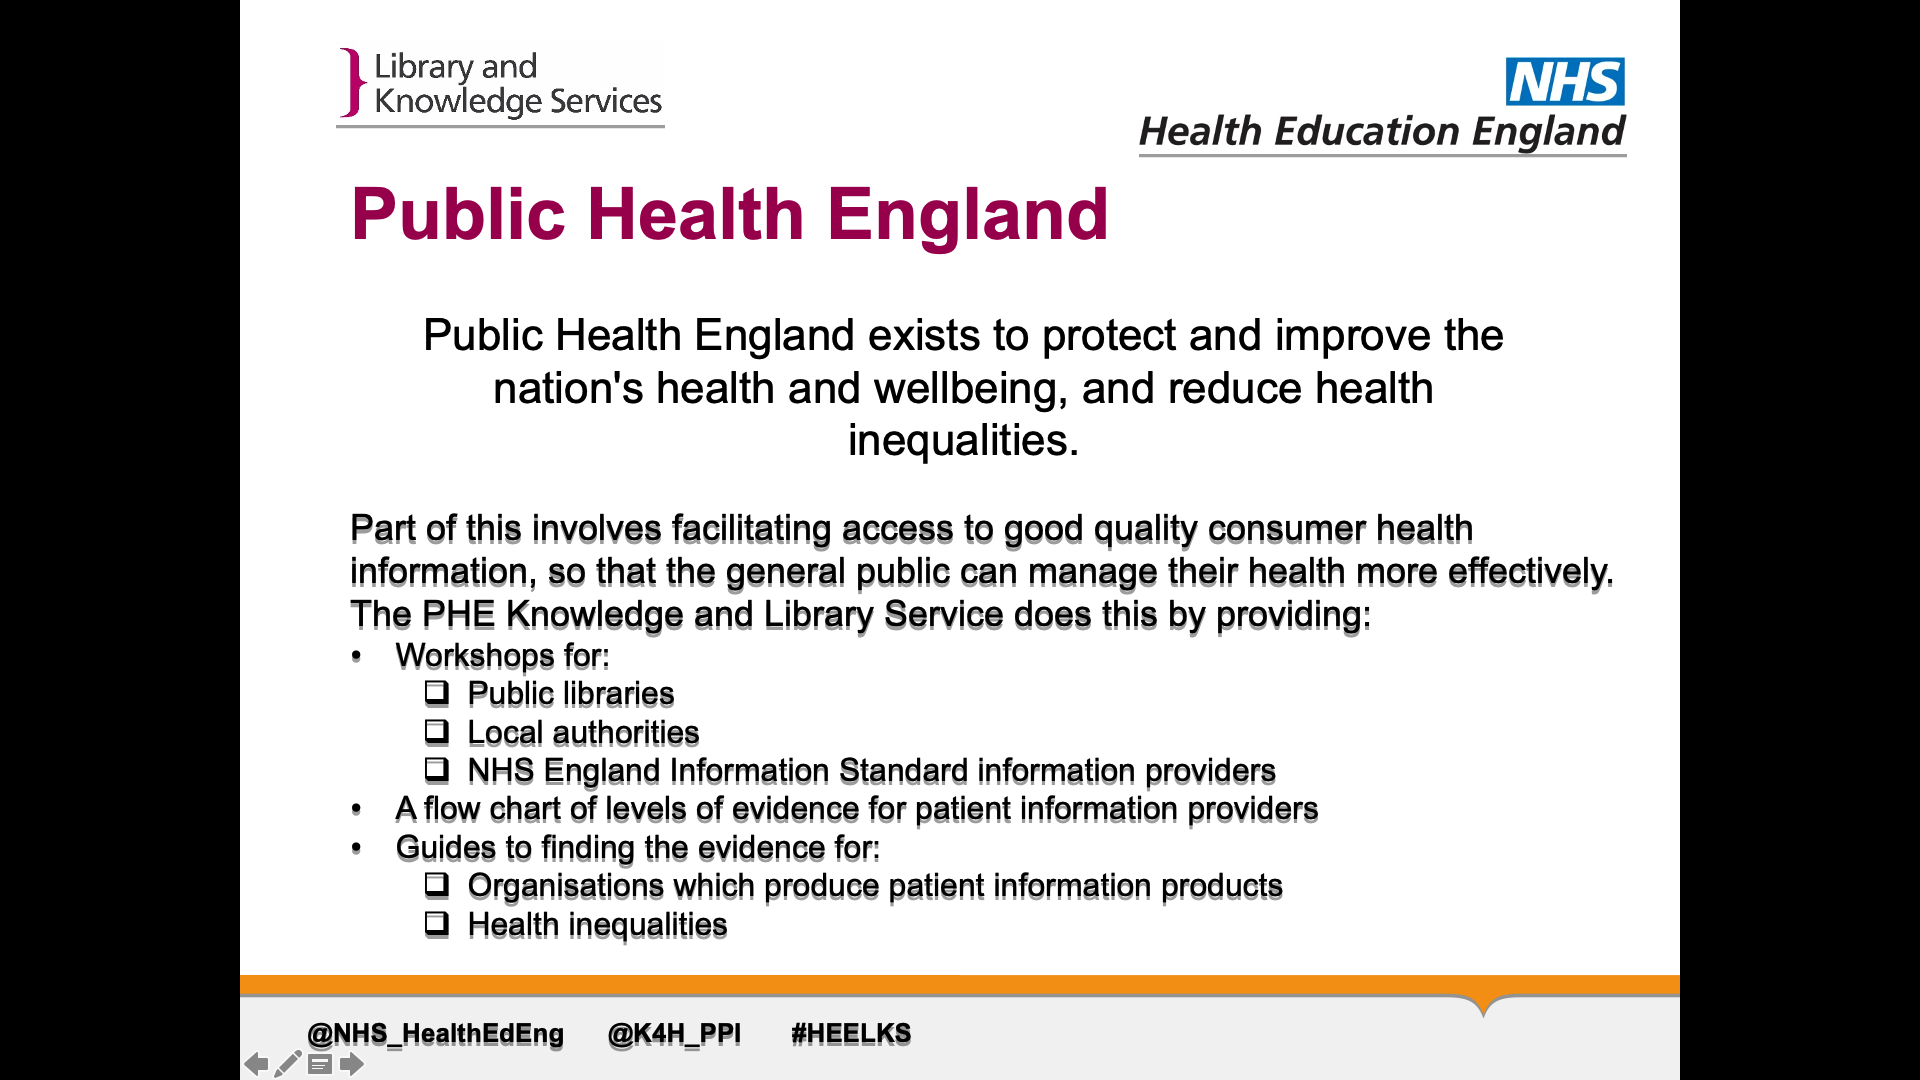 Text on page: Public health england exists to protect and improve the nation's health and wellbeing, and reduce health inequalities. Part of this involves facilitating access to good quality consumer health information, so that the general public can manage their health more effectively. The PHE Knowledge and Library Service does this by providing: 1. Workshops for: Public libraries, Local authorities, NHS England Information Standard information providers 2. A flow chart of levels of evidence for patient information providers 3. Guides to finding the evidence for Organisations which produce patient information products Health inequalities